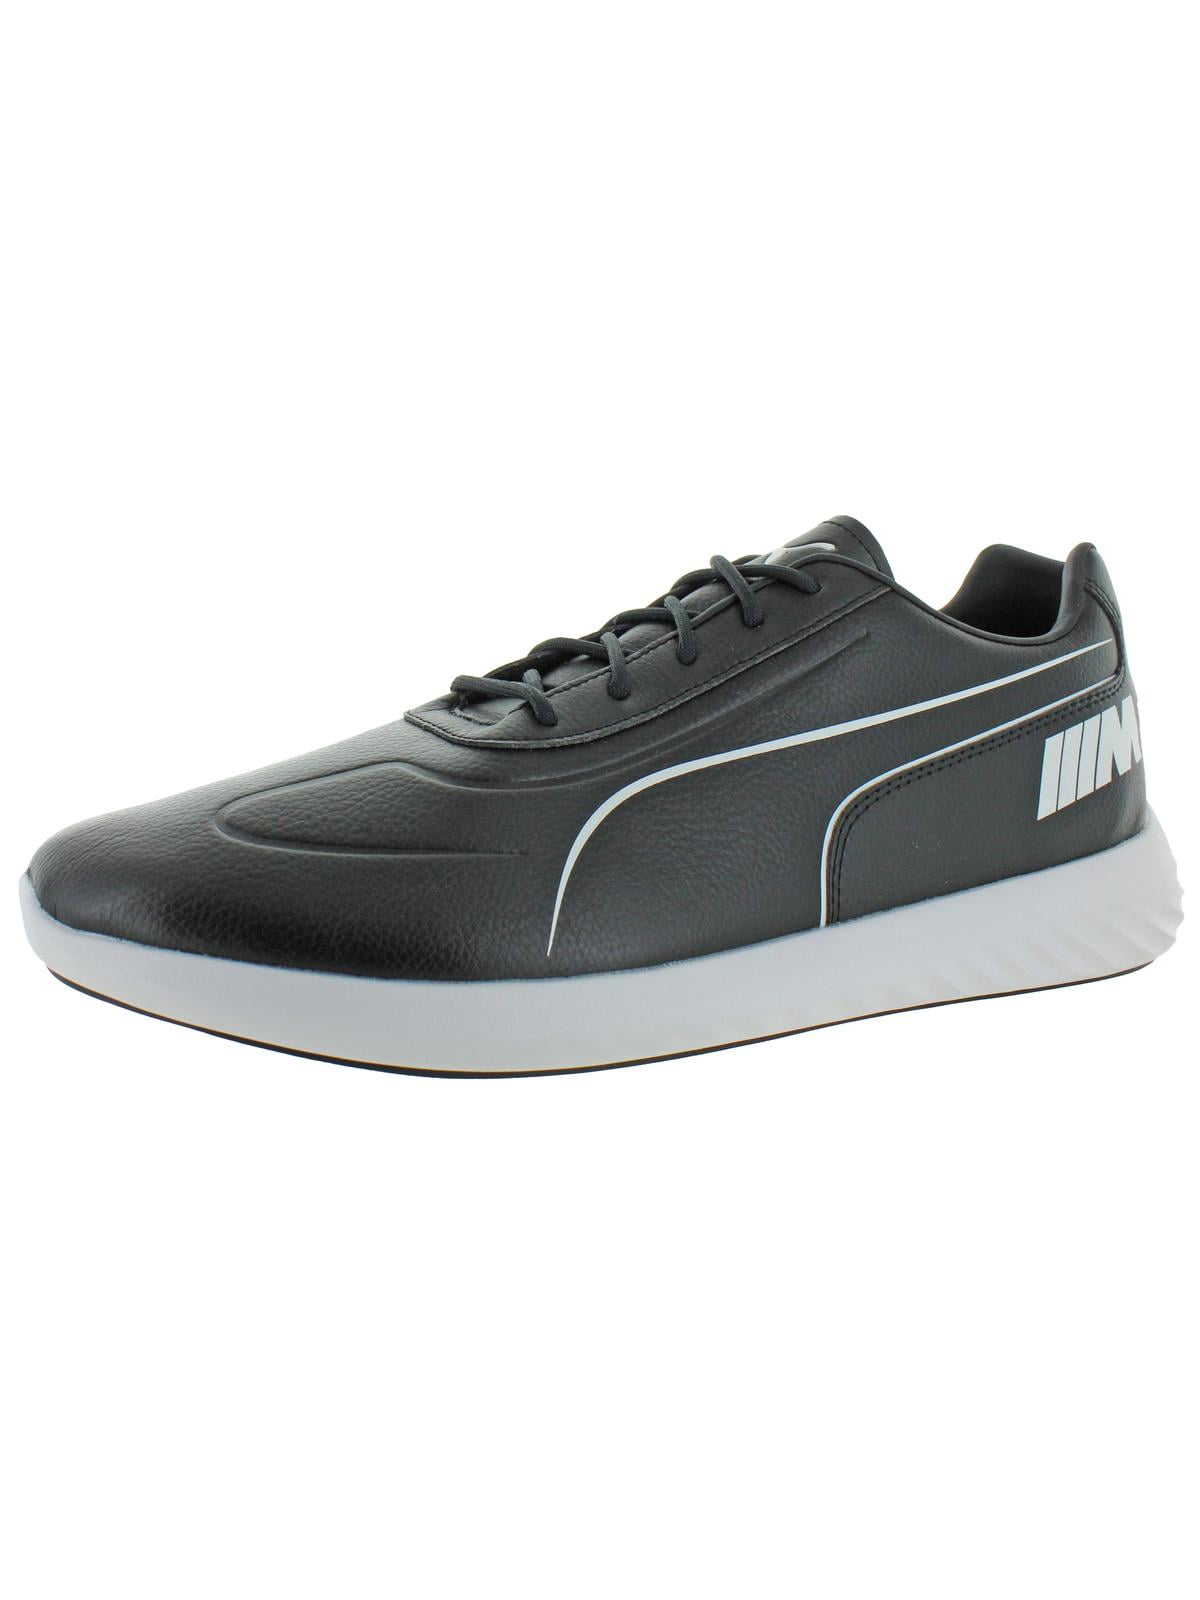 Puma Men's Bmw Mms Speed Cat Evo Synth Anthracite / White Ankle-High ...